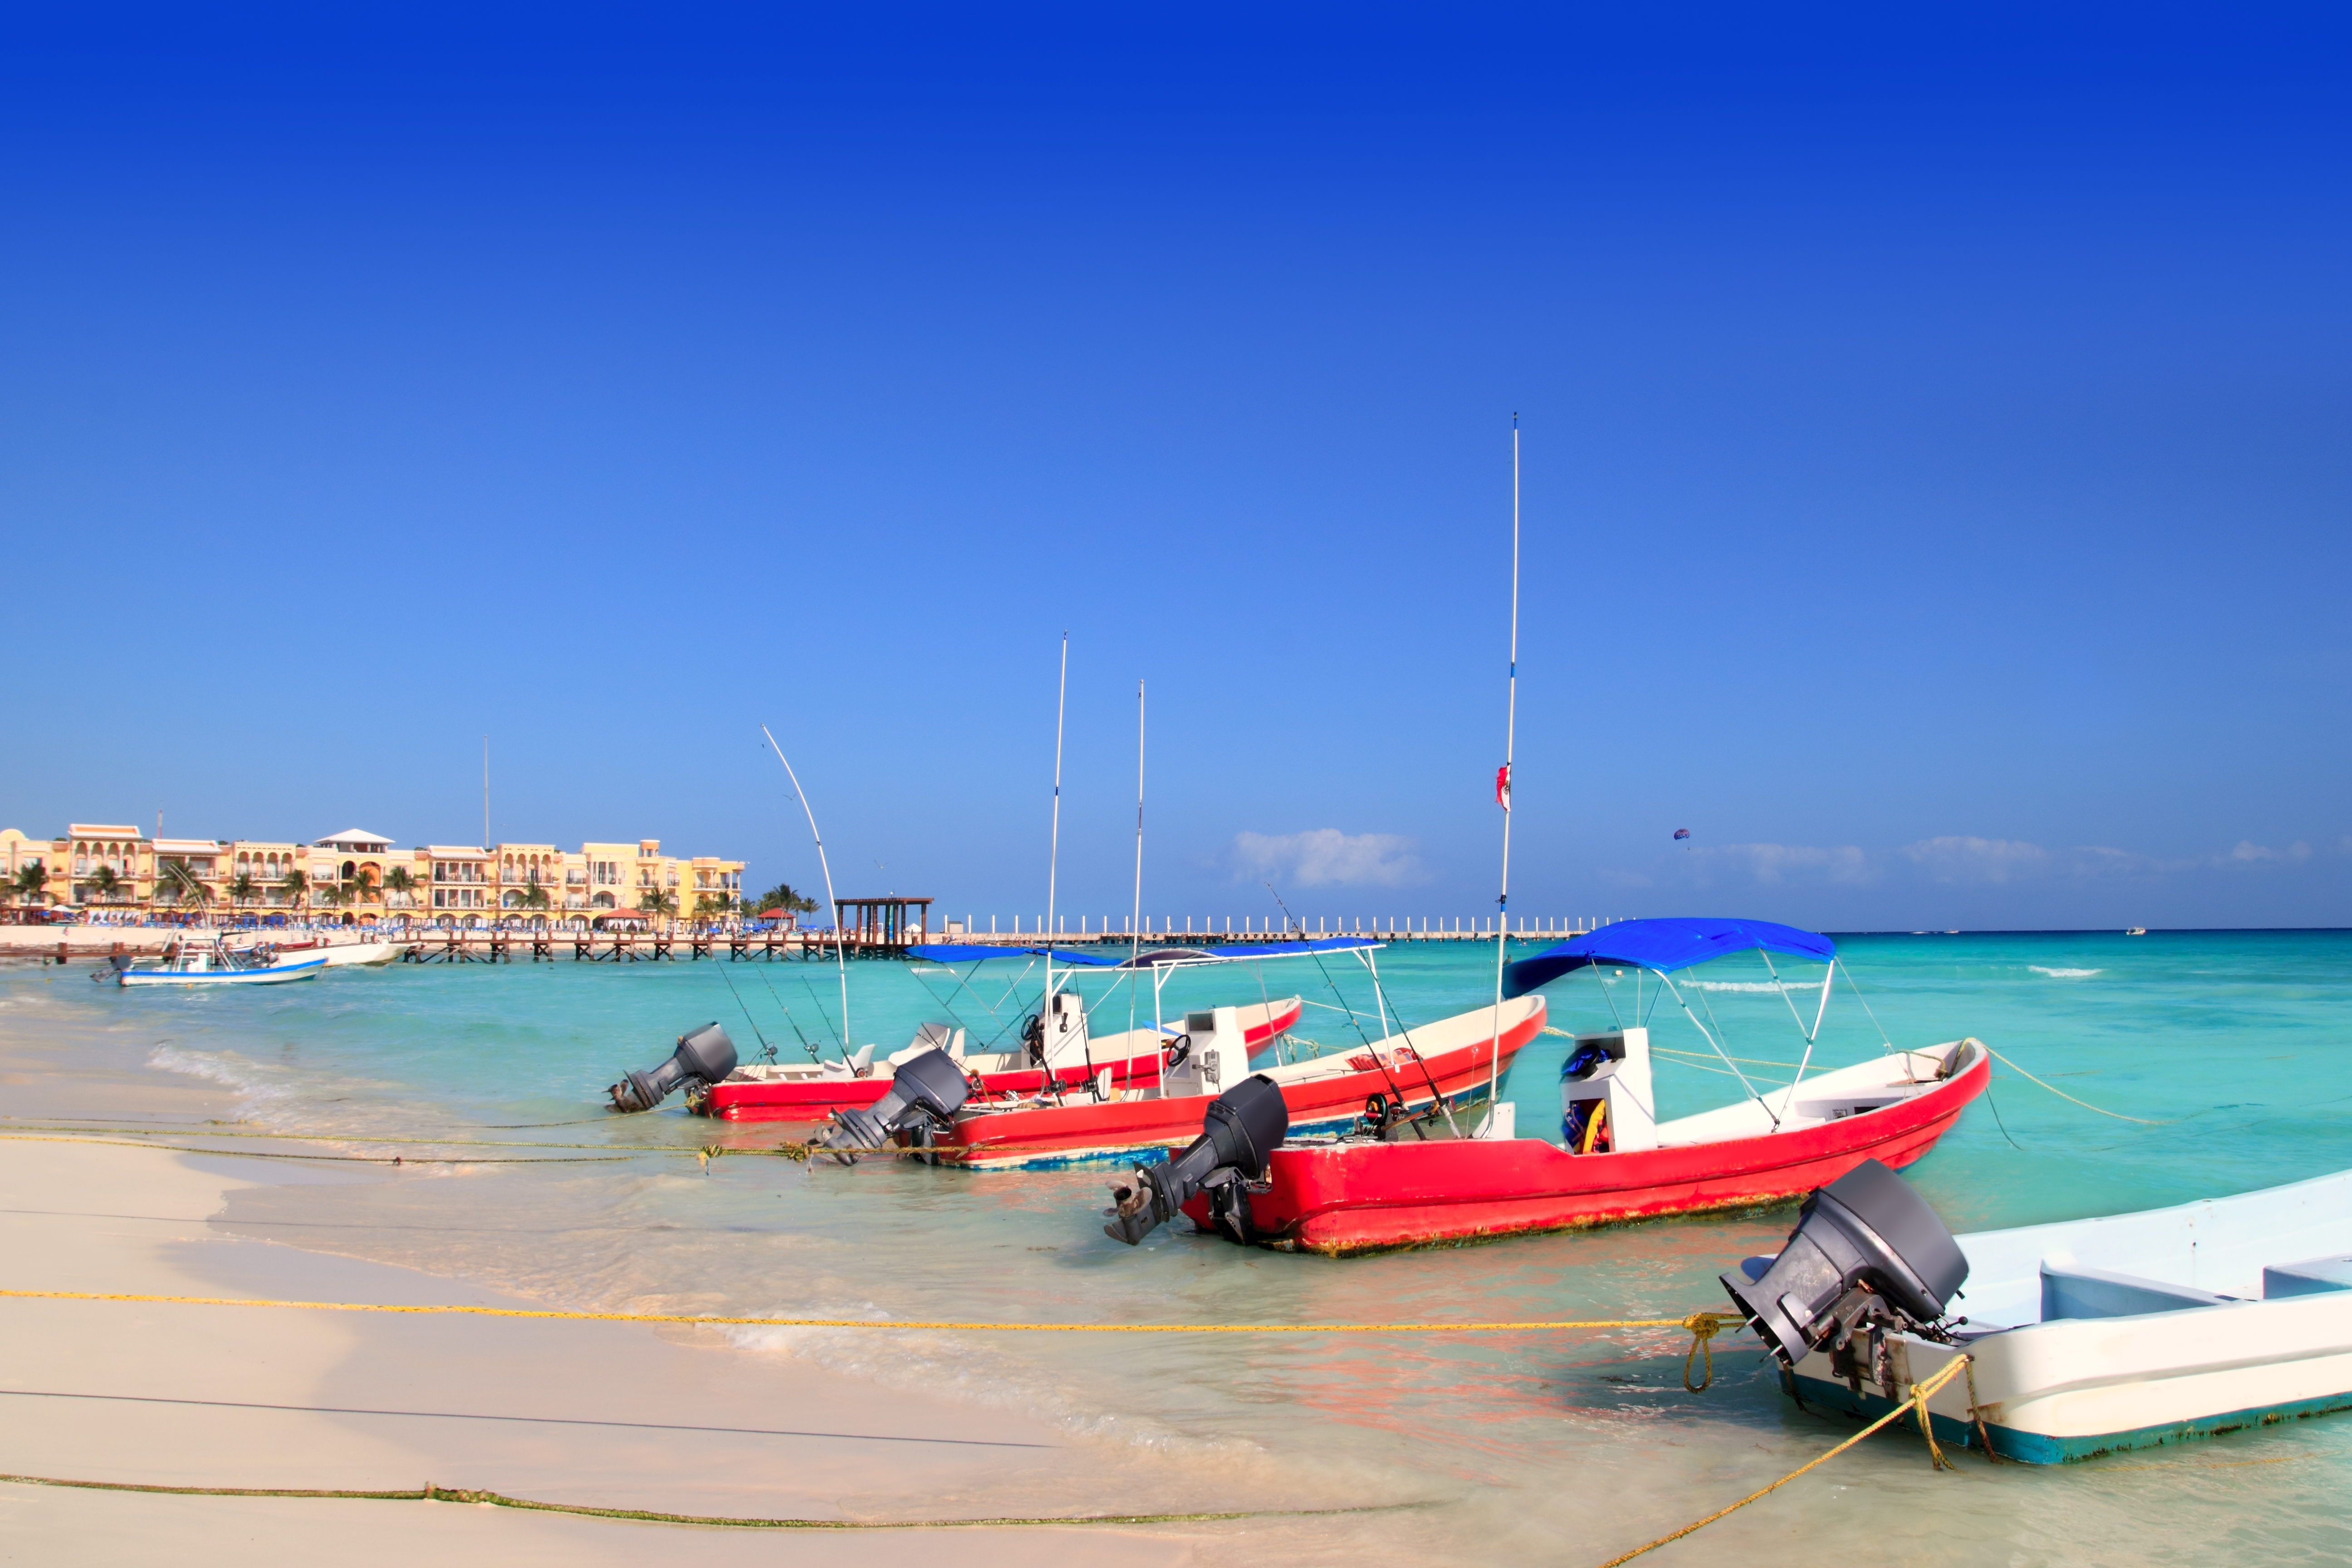 Boats on the shore at Playa del Carmen in Mexico